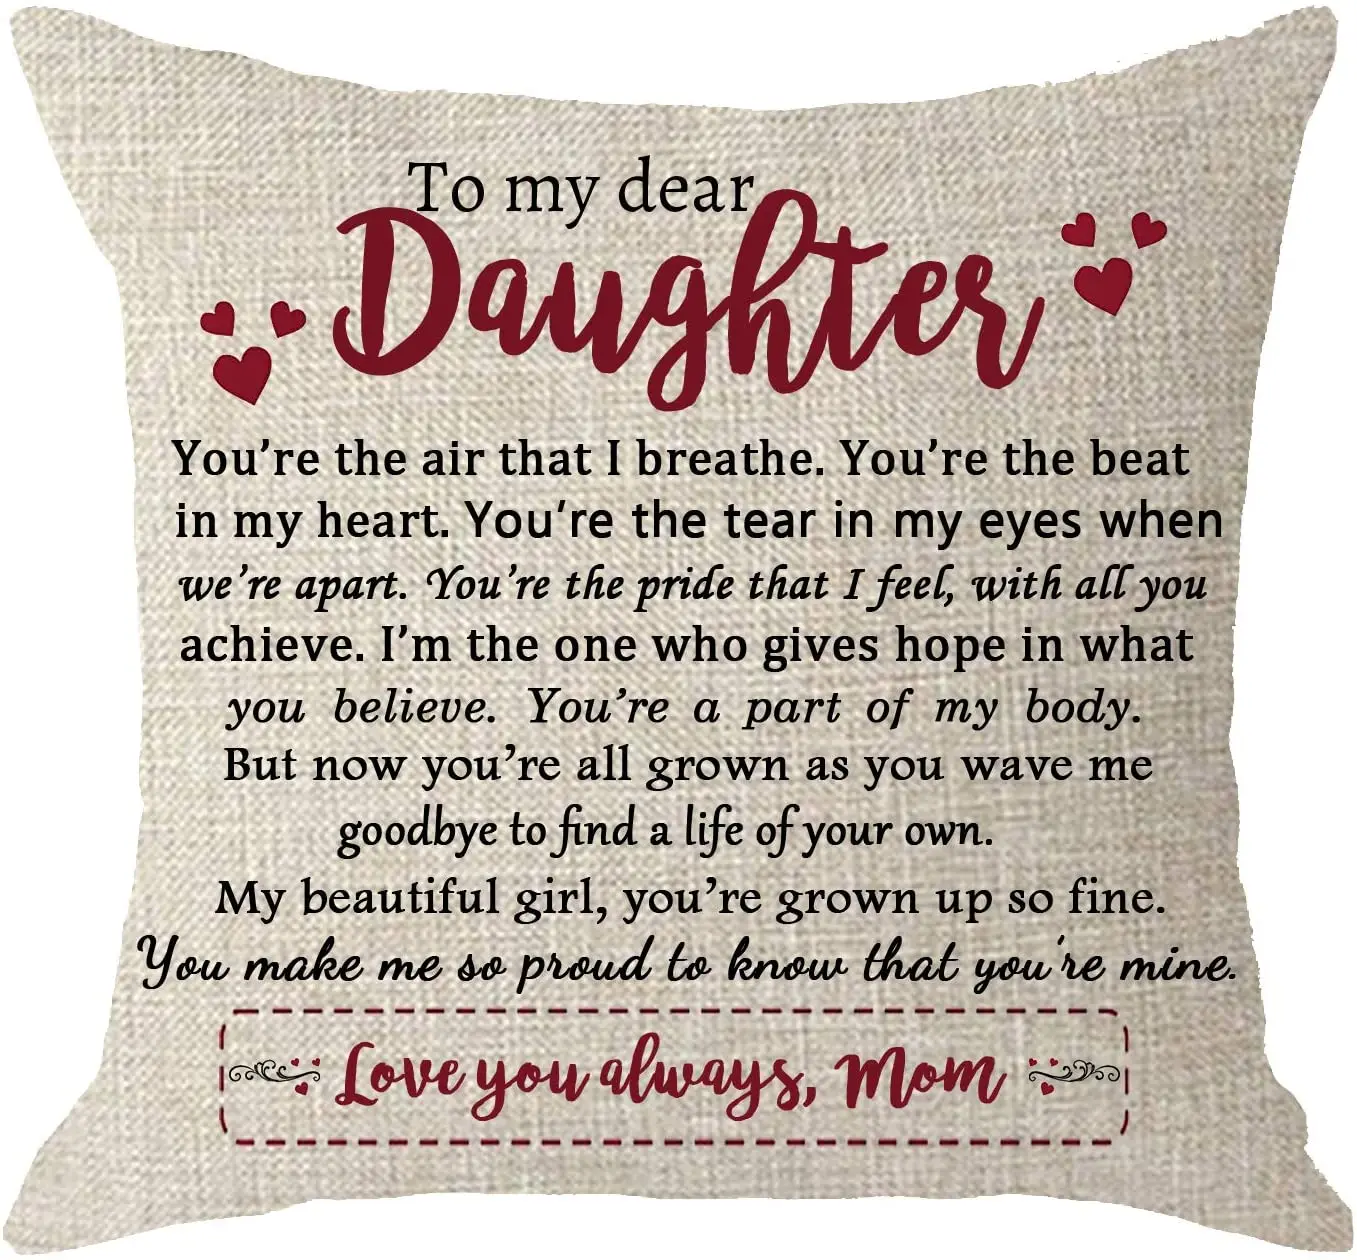 

Mother Day Daughters Birthday Gift Heart with Inspirational Words to My Dear Daughter Body Burlap Throw Pillow Case